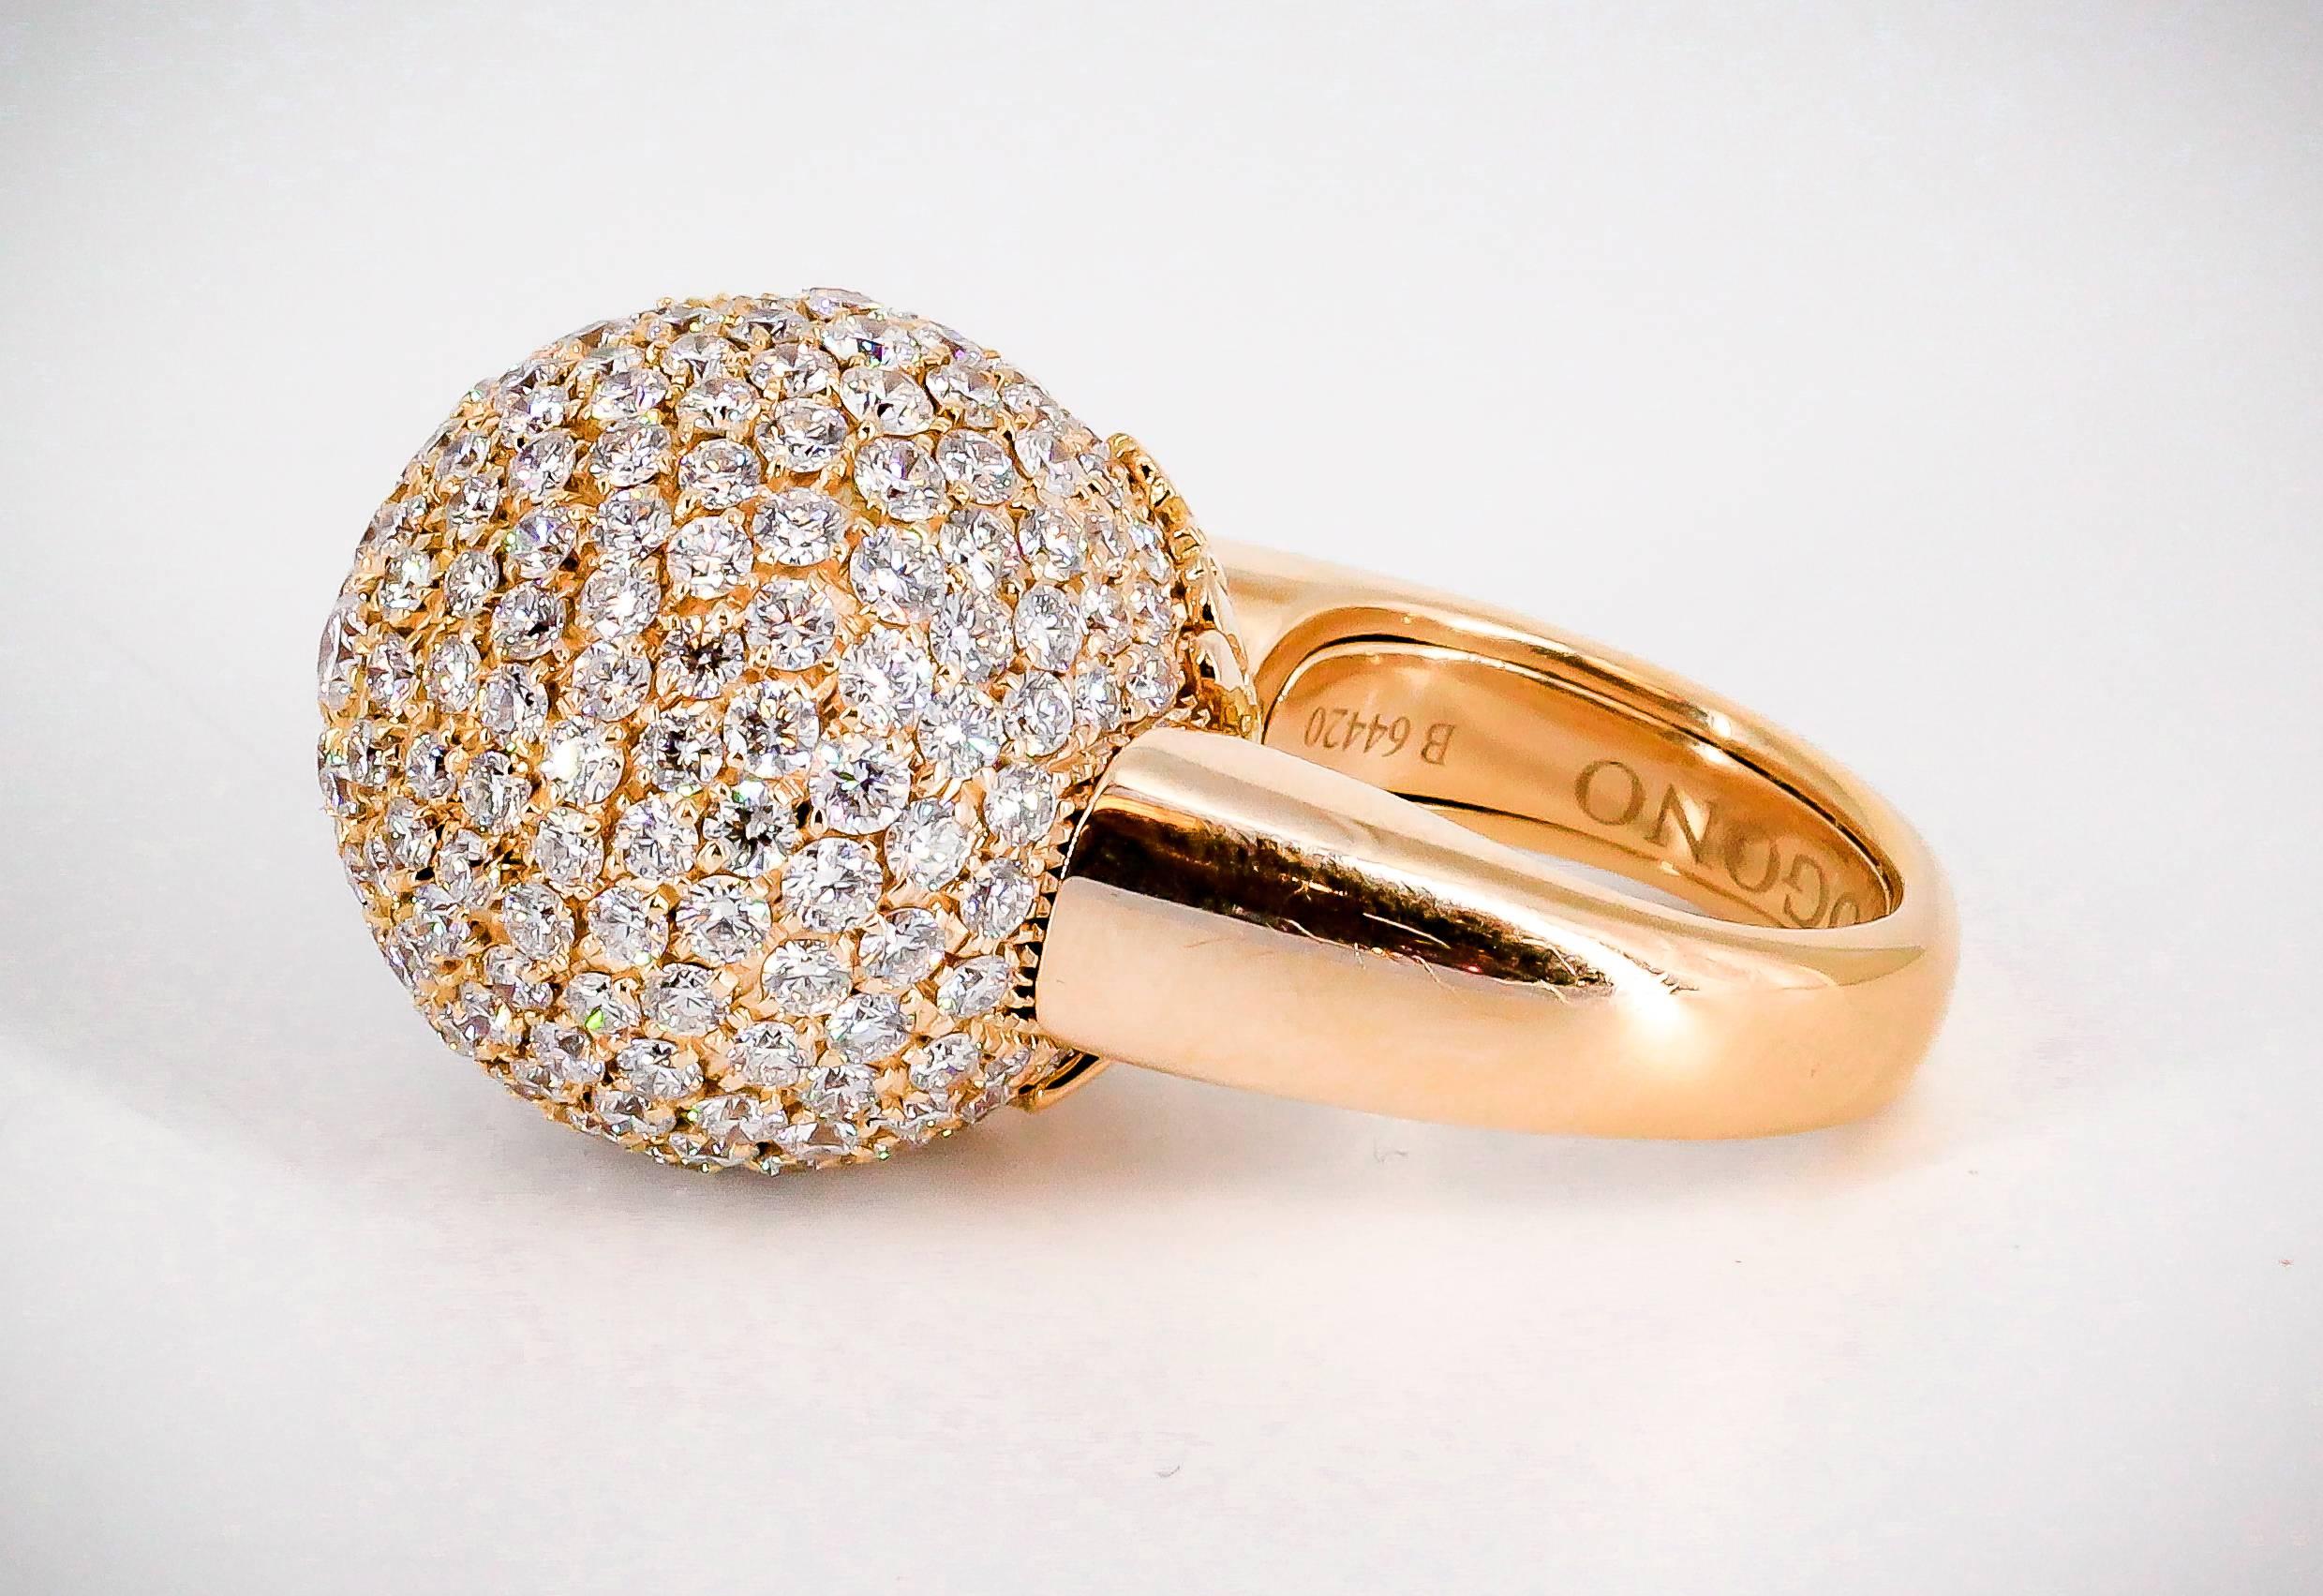 Bold diamond and 18K rose gold dome ring by De Grisogono. It features high grade round brilliant cut diamonds throughout the dome, approx. 9.0cts total weight. Beautifully made and impressive worn alone or stacked with another like ring as shown in